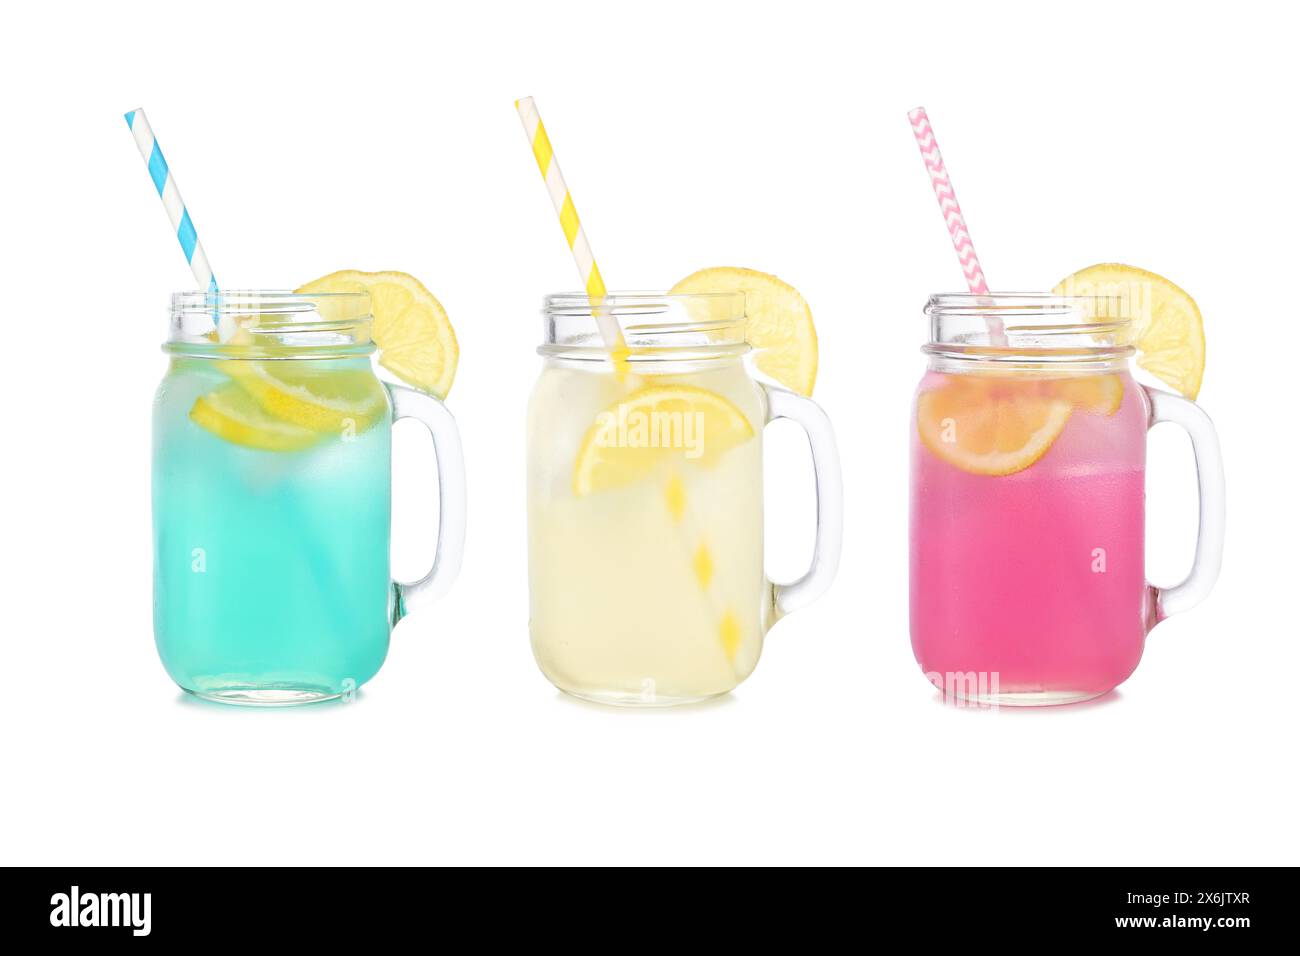 Cold, colorful summer lemonade drinks. Blue, yellow and pink colors in mason jar glasses isolated on a white background. Stock Photo